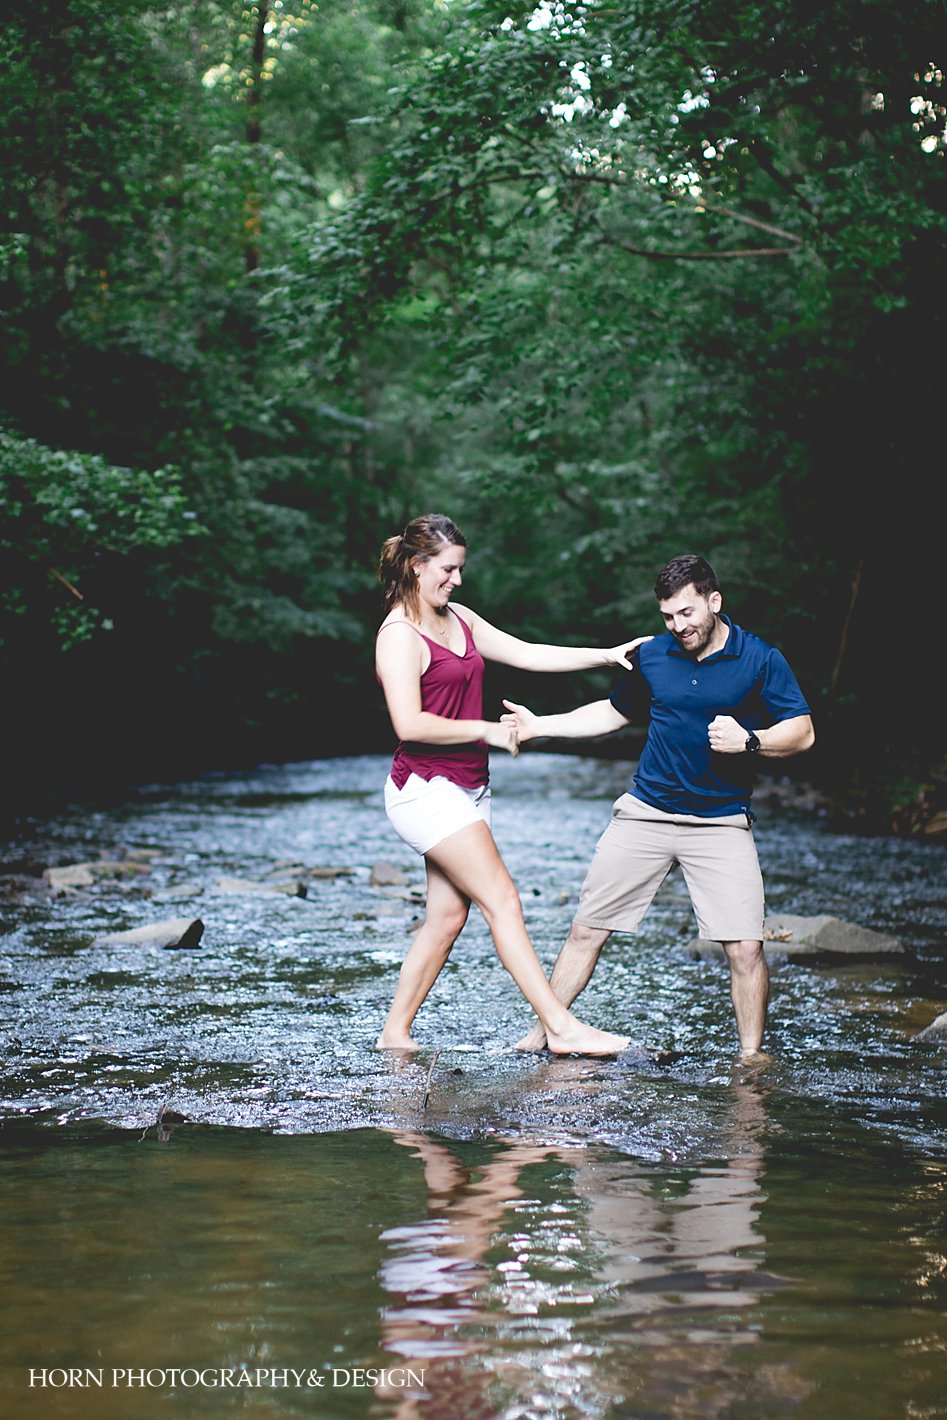 Engaged Couple in Middle of River